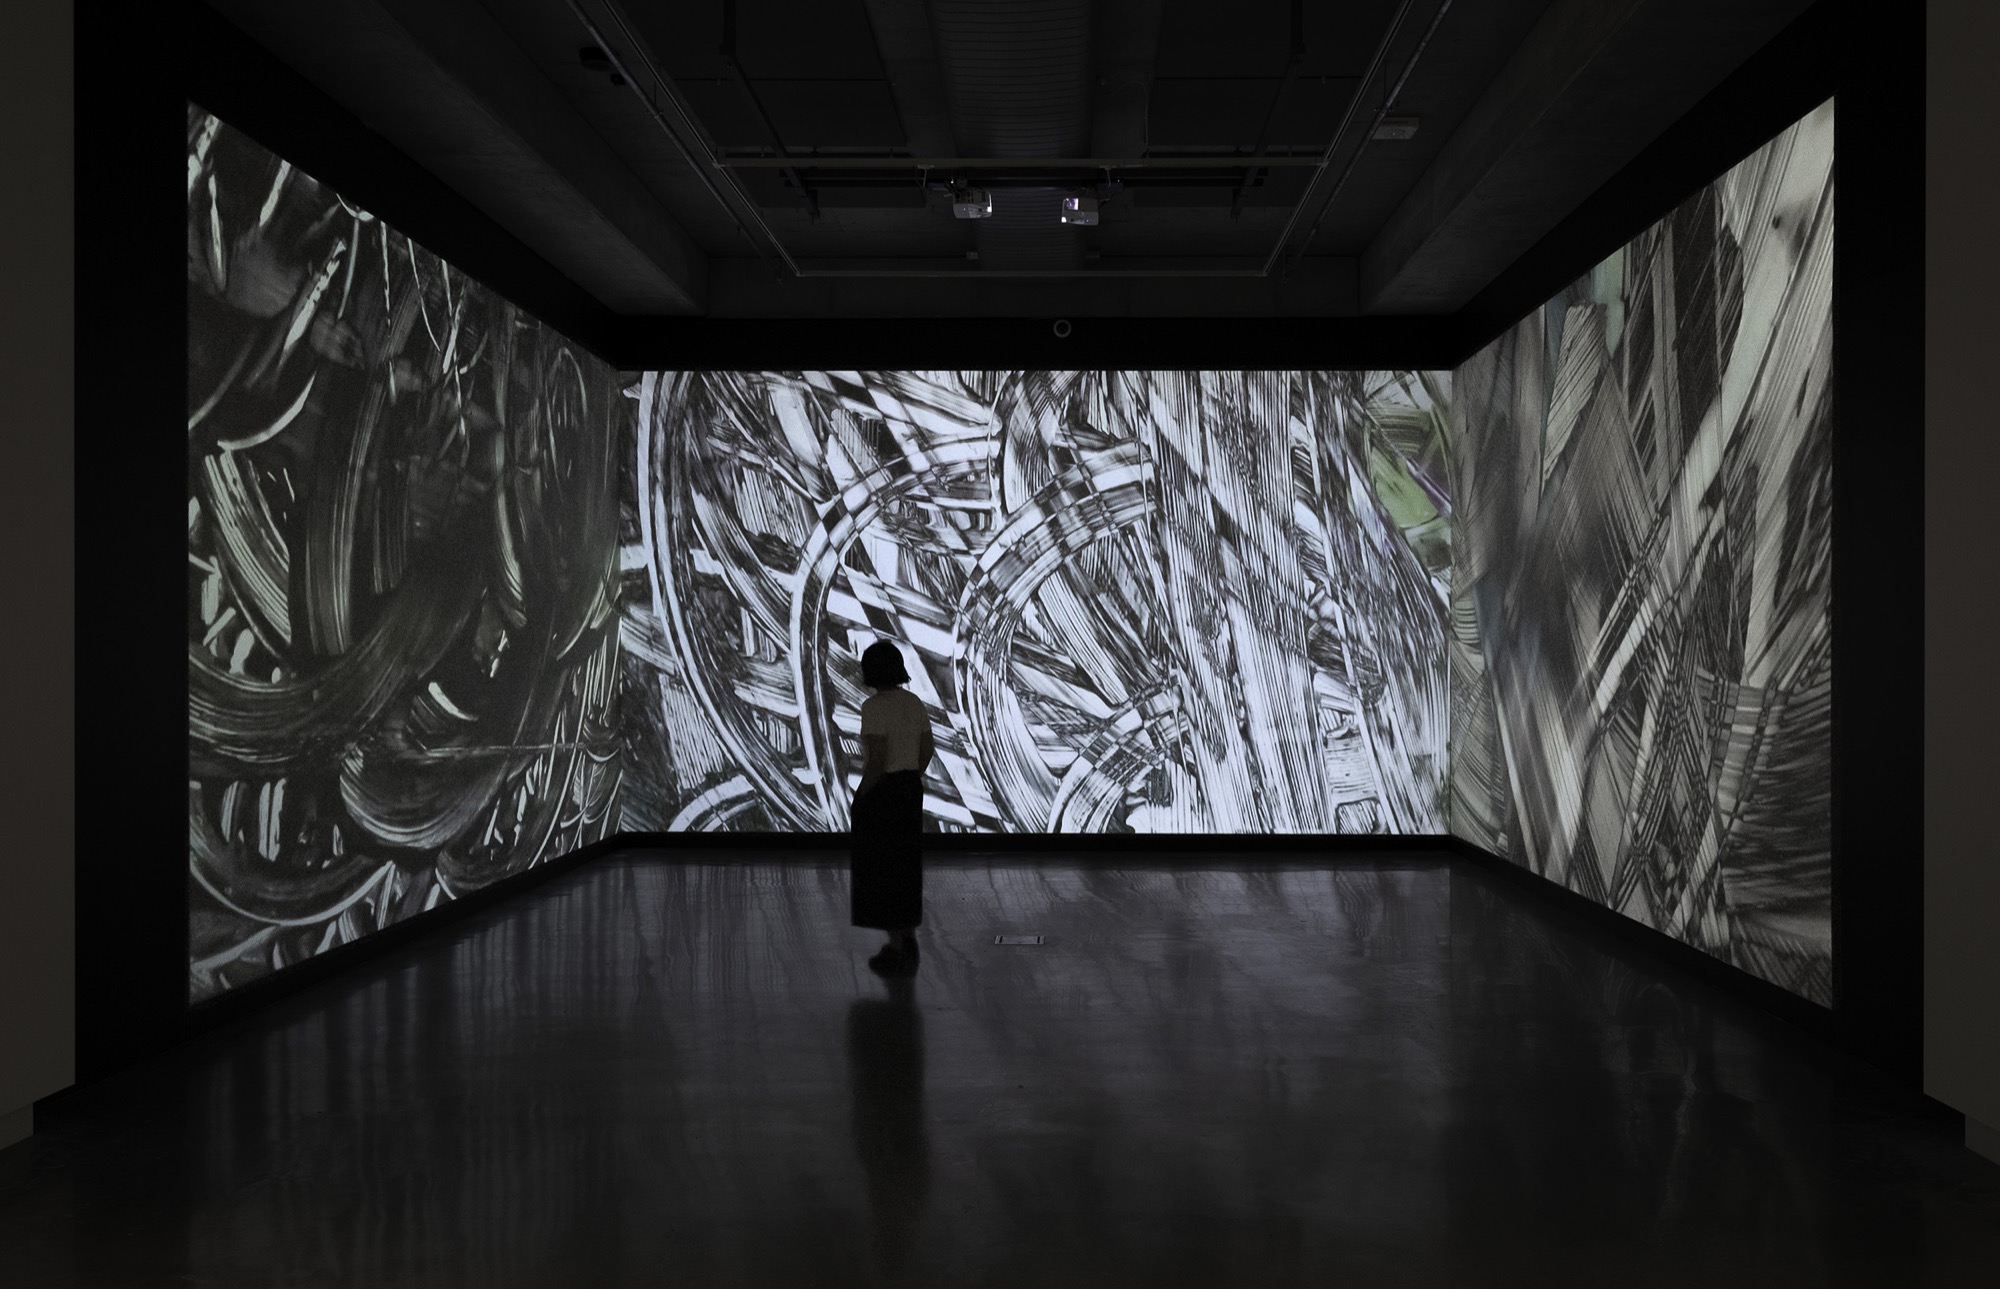 Installation view, Mira Gojak and Takehito Koganezawa, <em>The Garden of Forking Paths</em>. Image courtesy the artists and Buxton Contemporary.